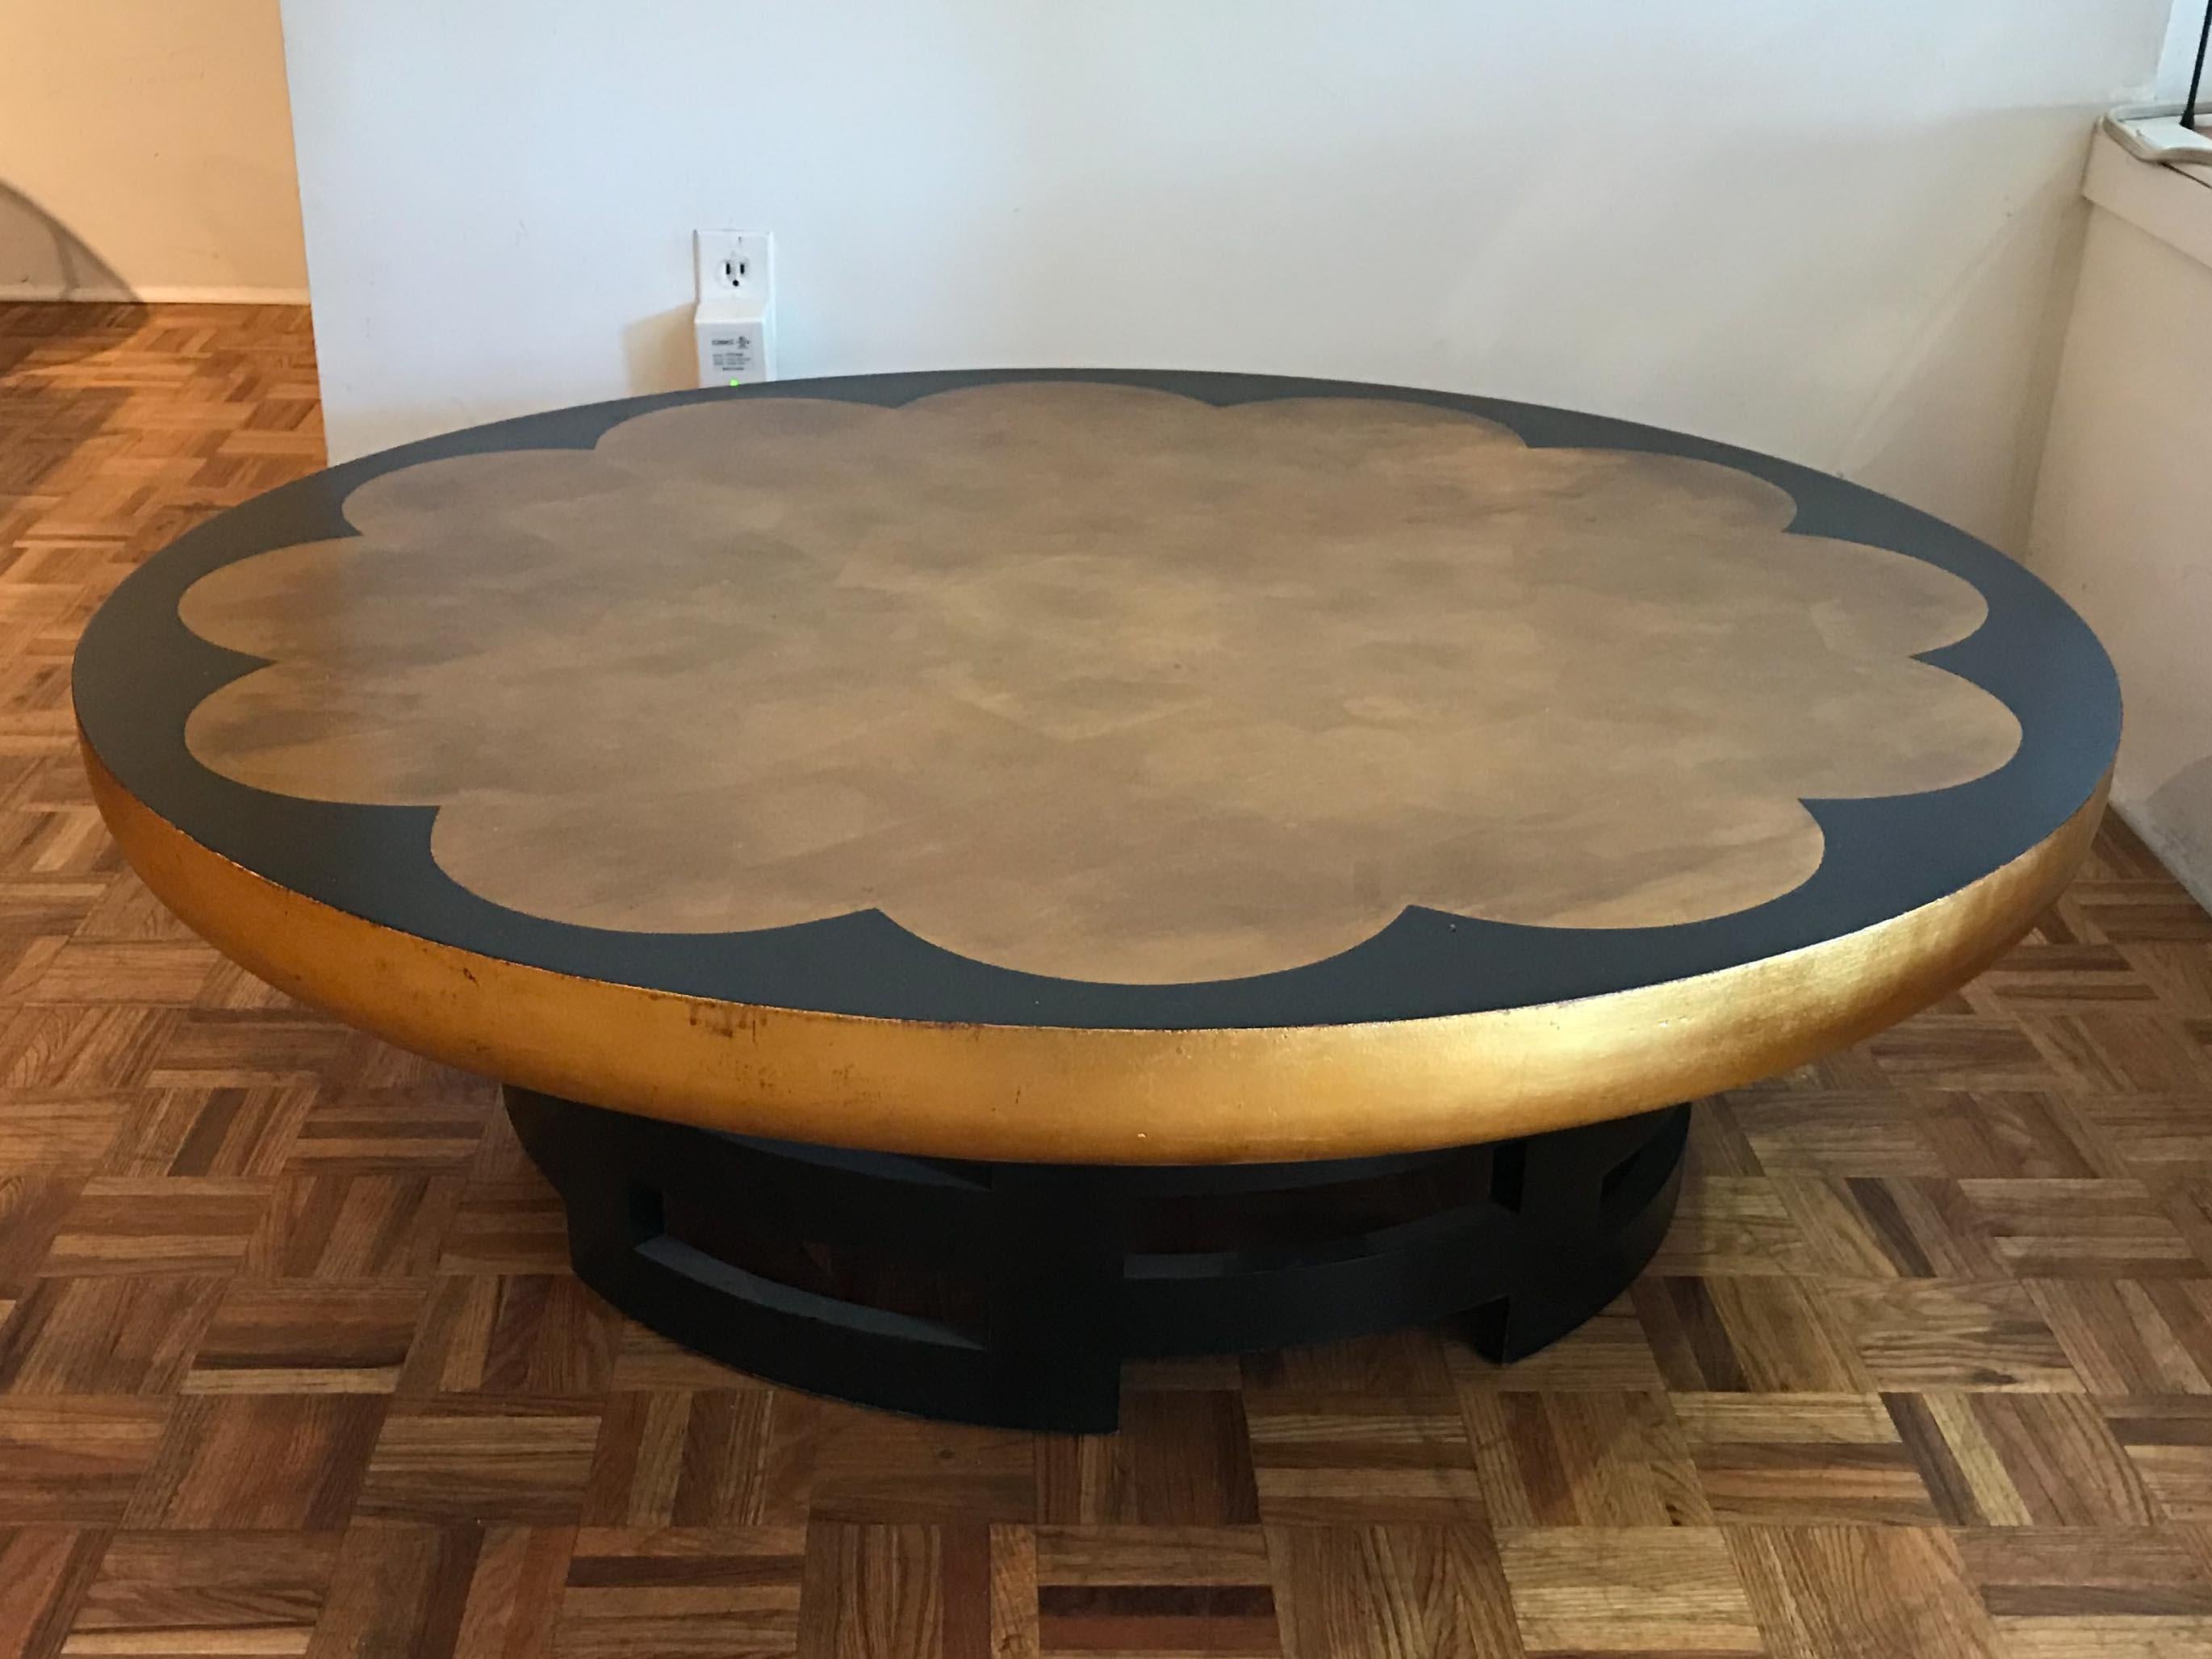 Lotus coffee table by Theodore Muller and Isabelle Barringer for Kittinger Furniture. Gold leaf floral medallion with gold leaf outer edge on ebonized plinth. Good vintage condition with small repair to gold leaf finish on top.